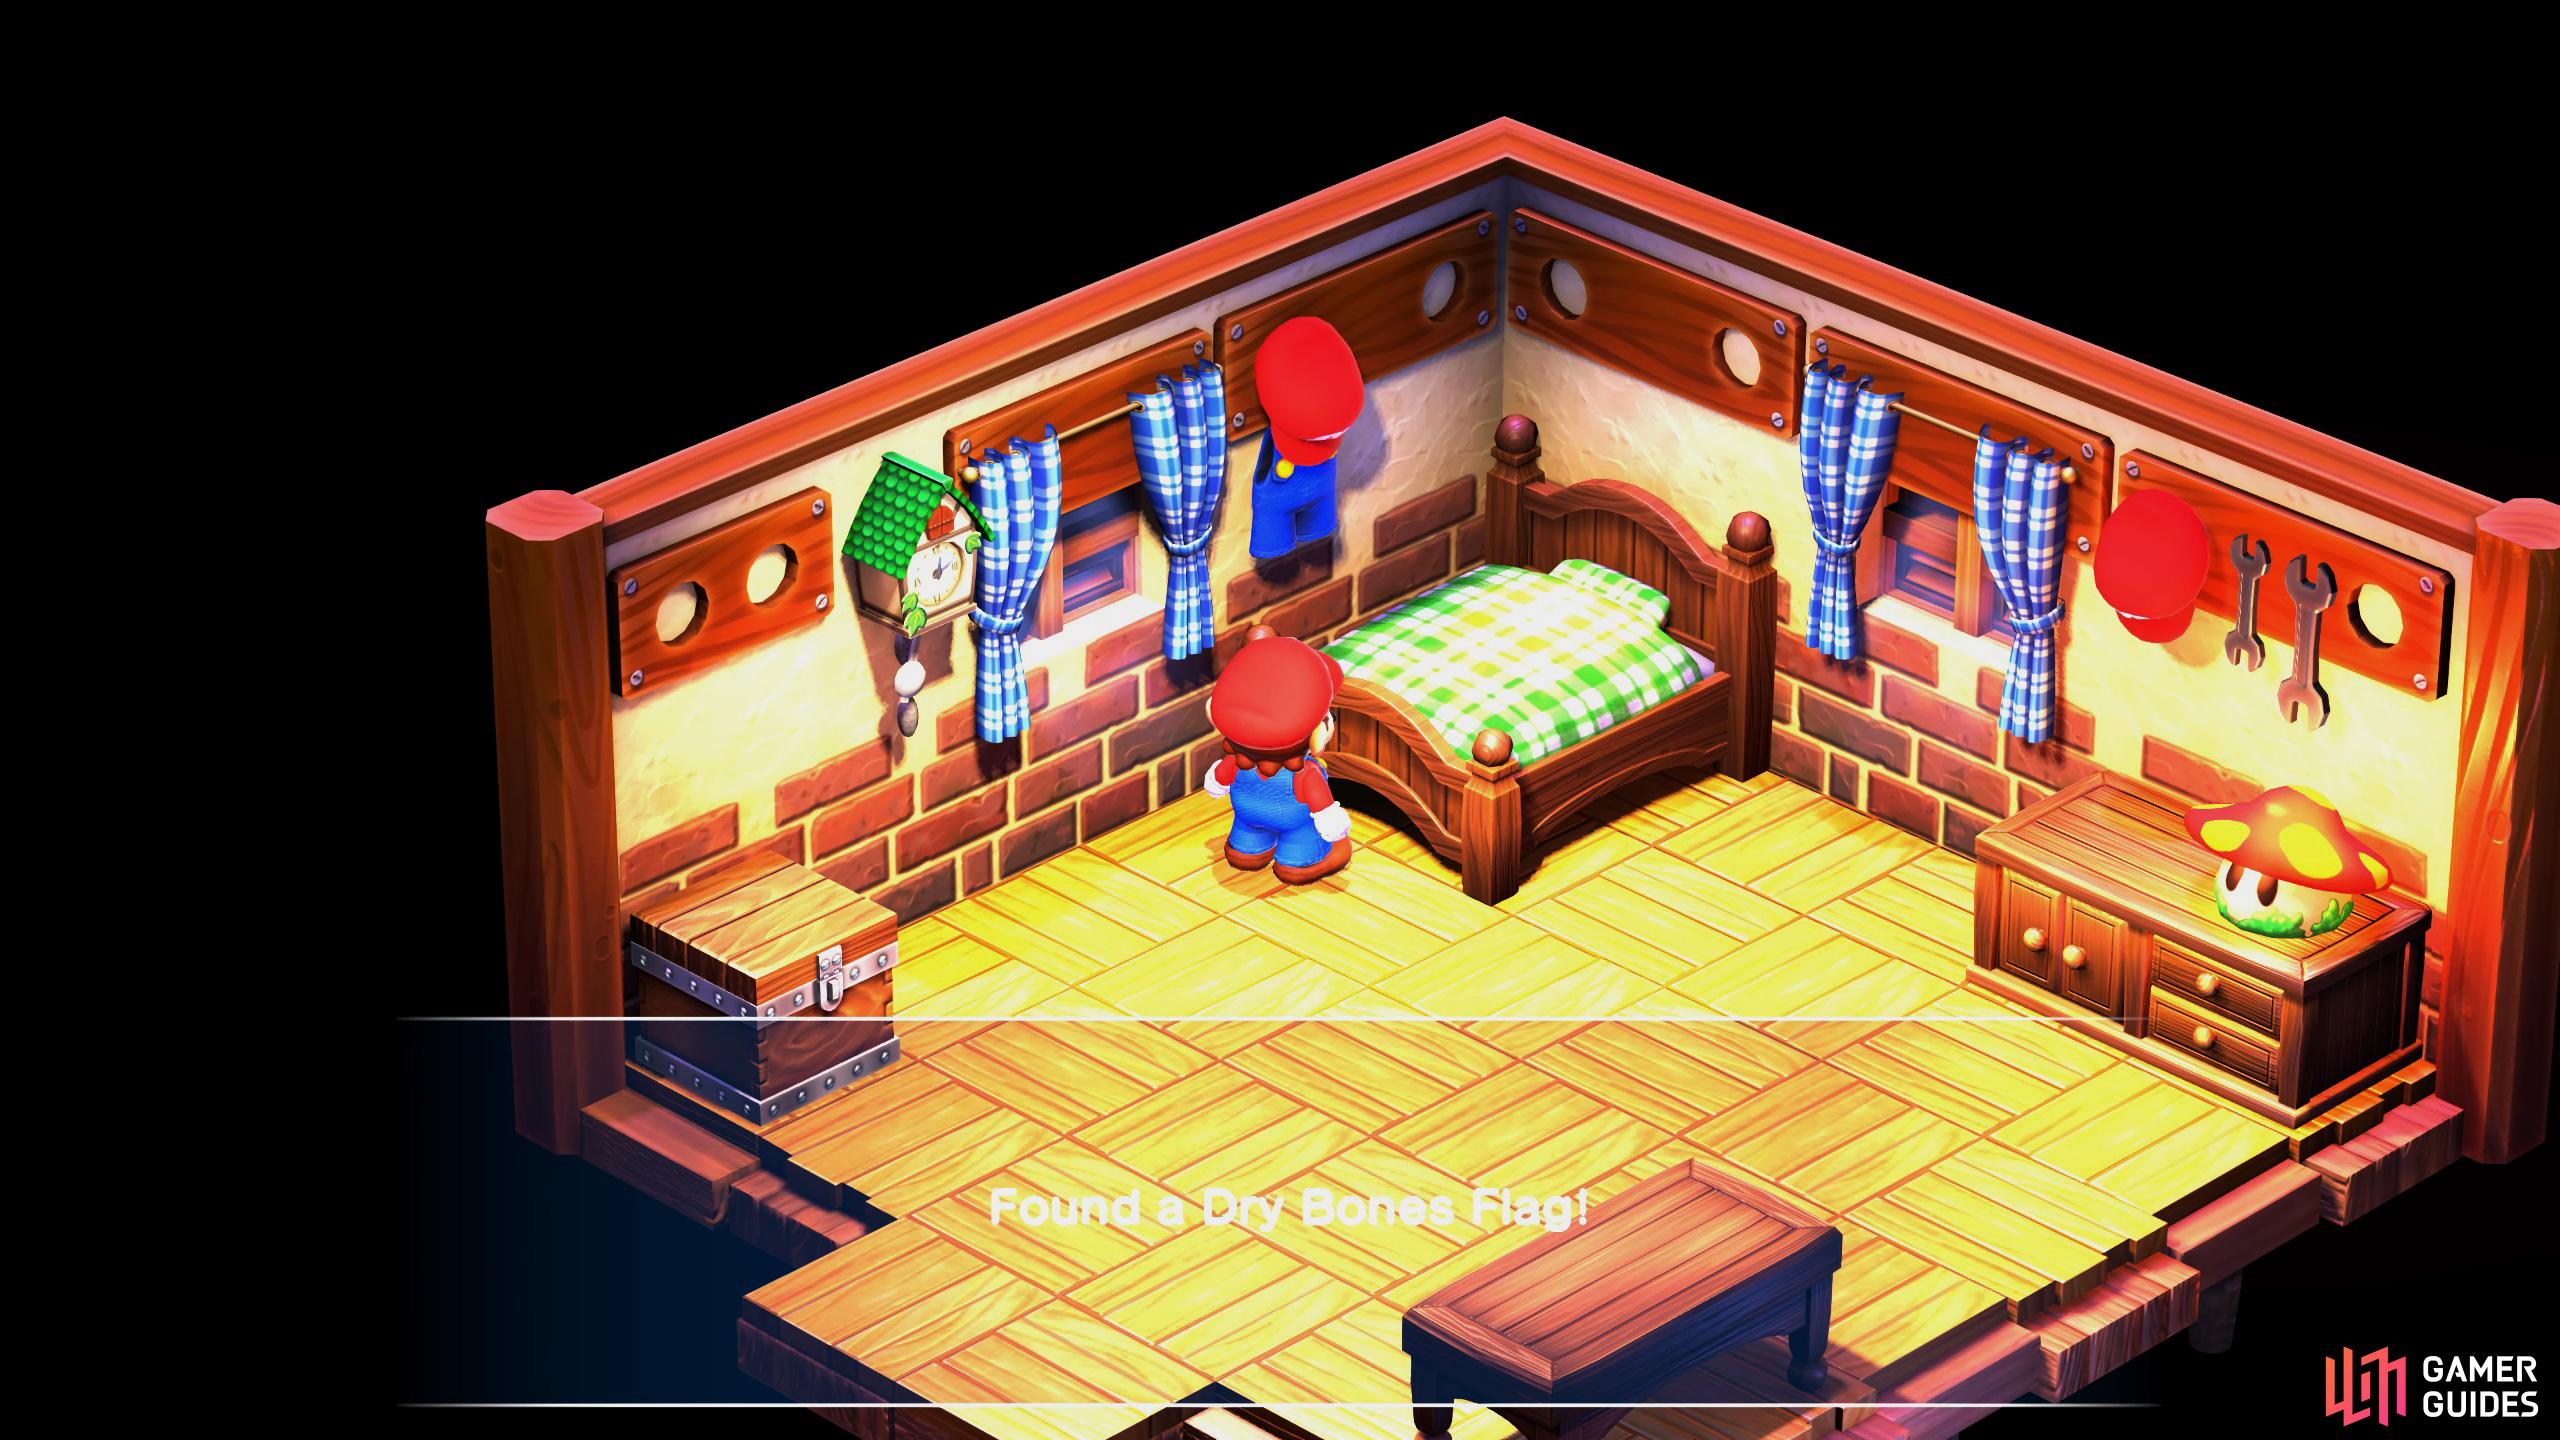 Well, the bed in Mario's Pad is green, why not check there?